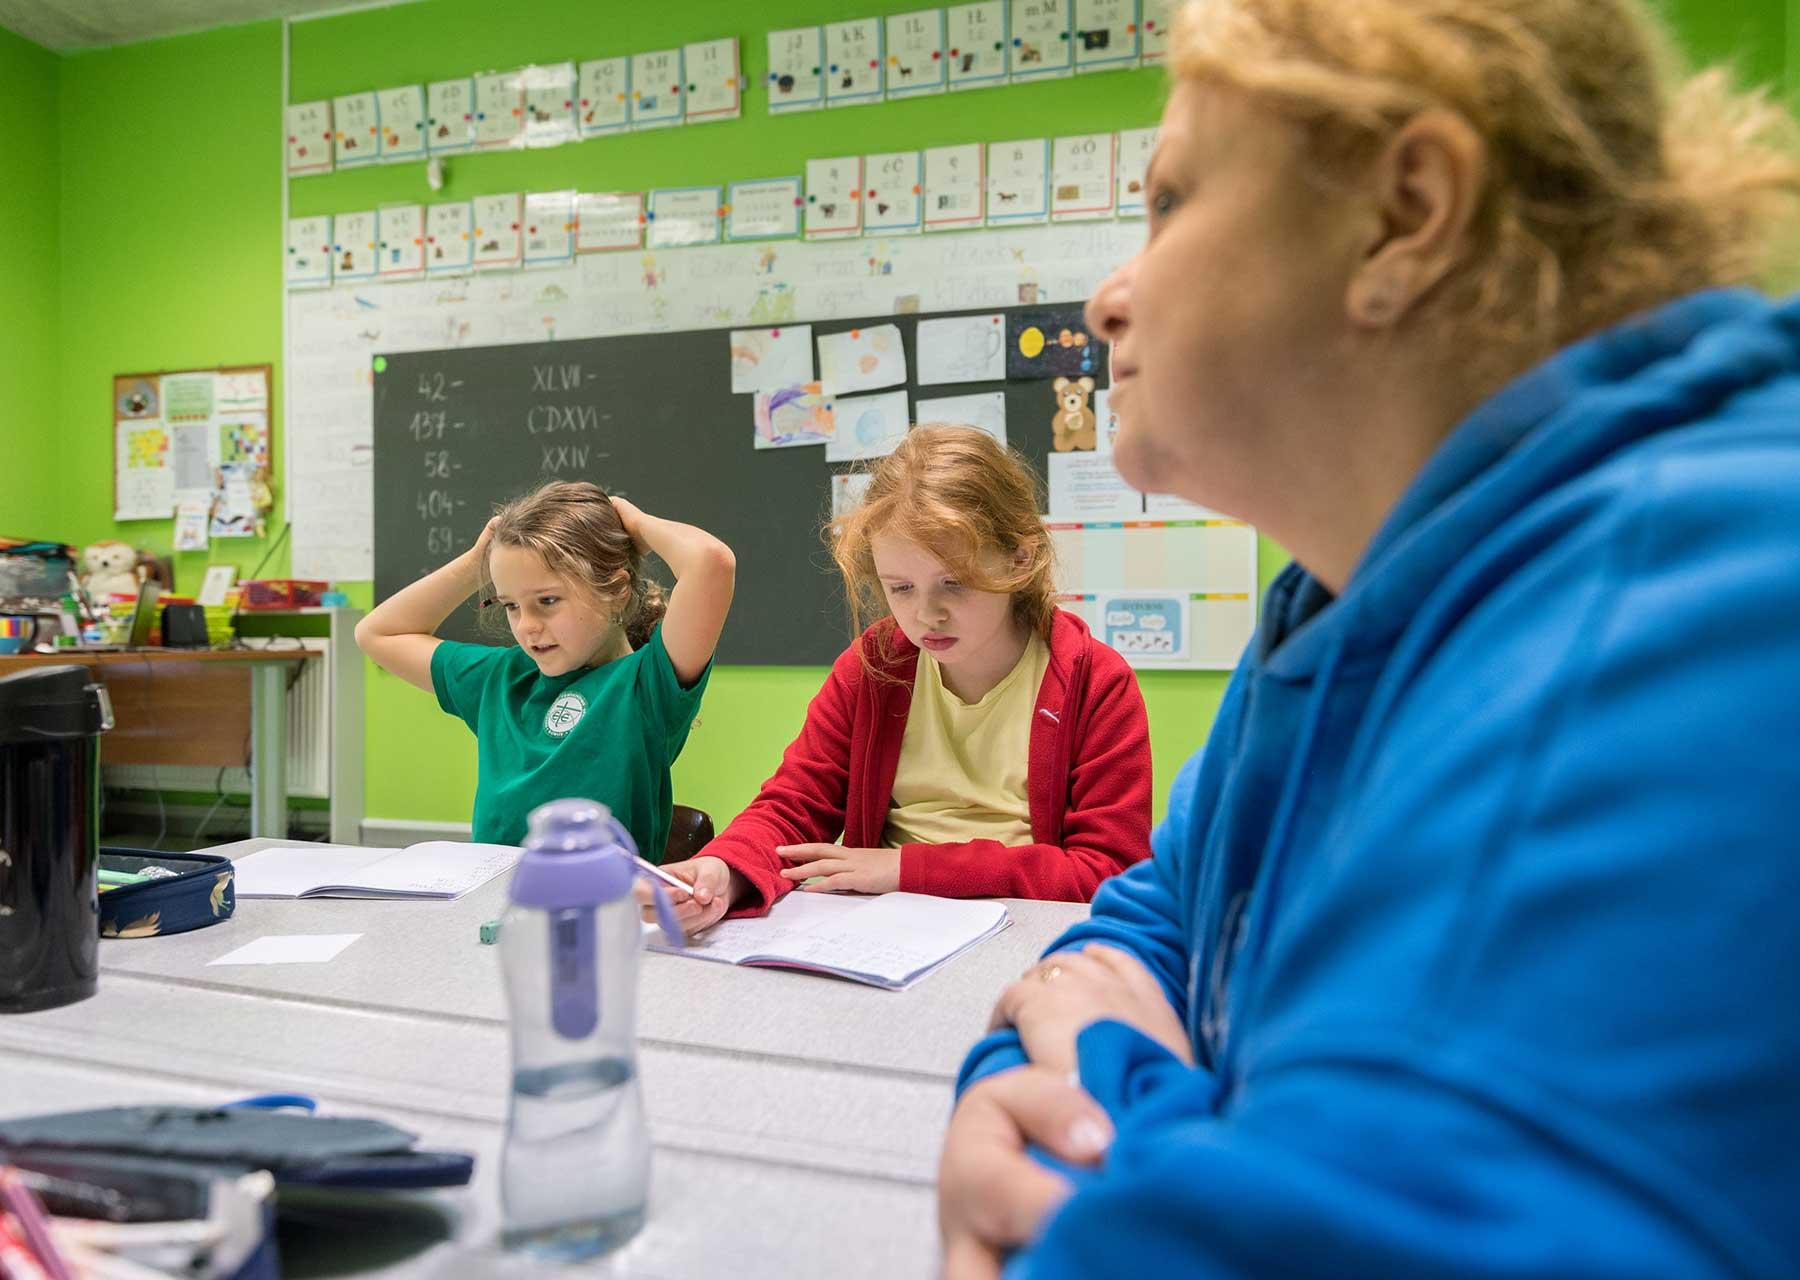 Ukrainian children in a school in Gliwice, Poland. For many families, sending their children to a local school is the first step towards integration. Photo: LWF/ Albin Hillert